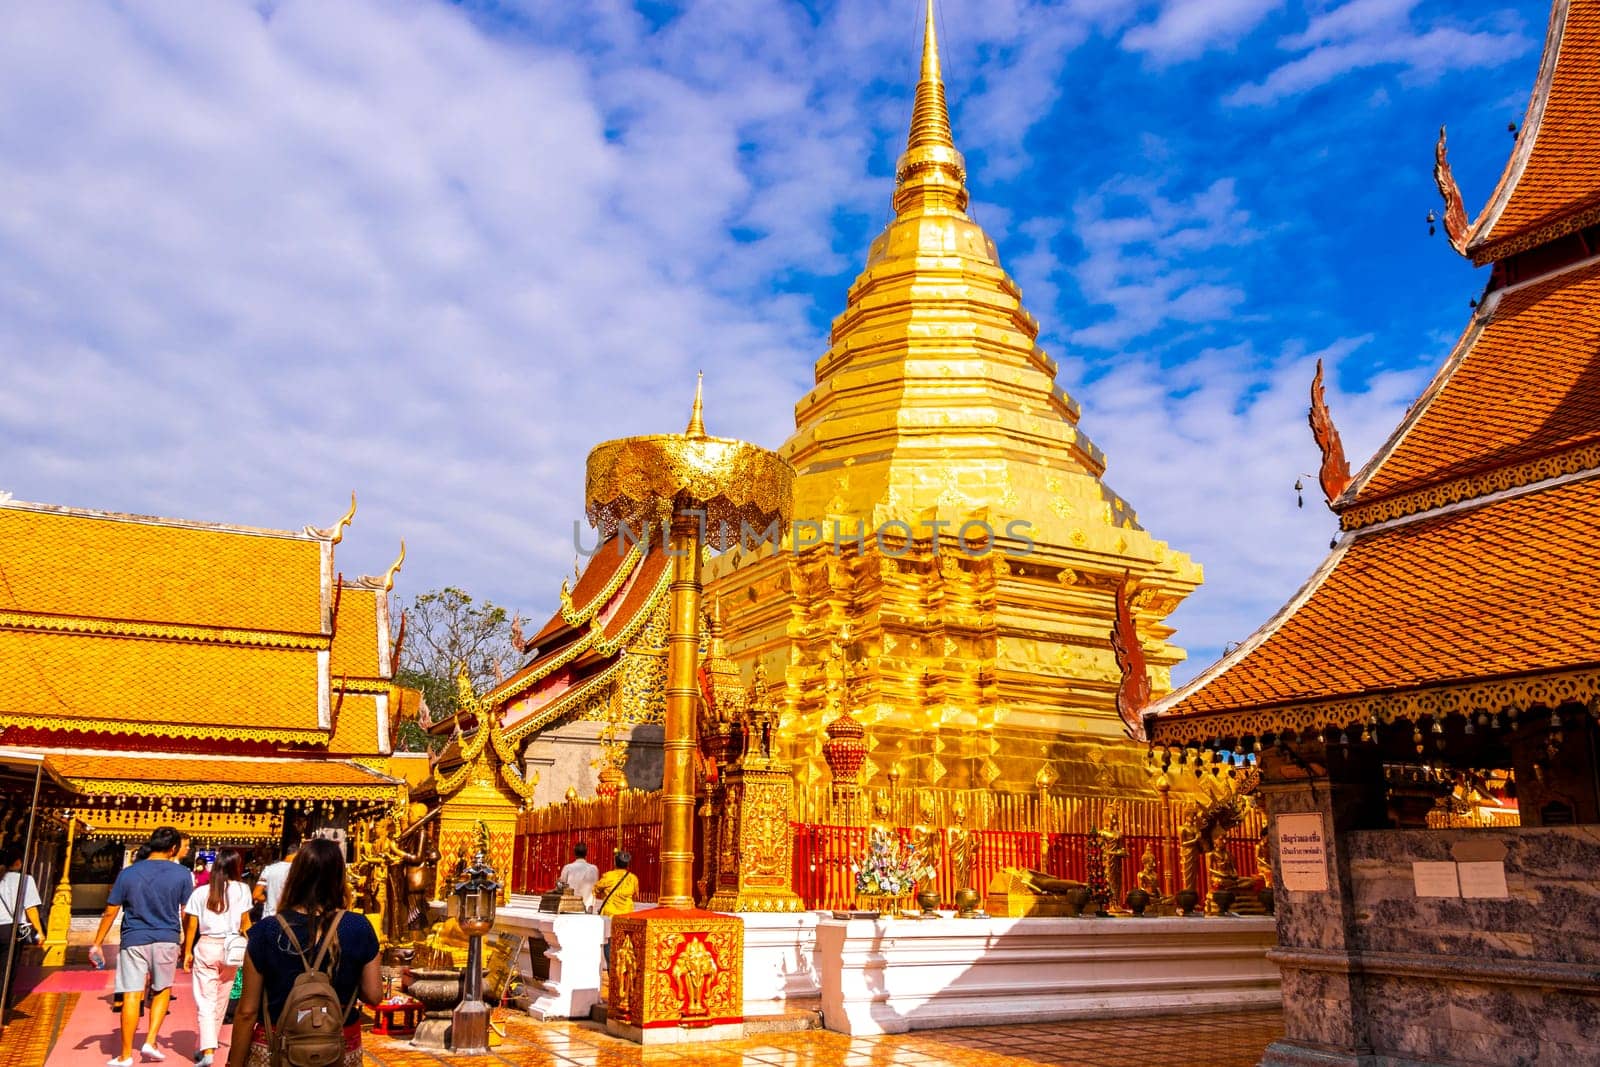 Golden gold stupa pagoda Wat Phra That Doi Suthep temple temples building in Chiang Mai Amphoe Mueang Chiang Mai Thailand in Southeastasia Asia.